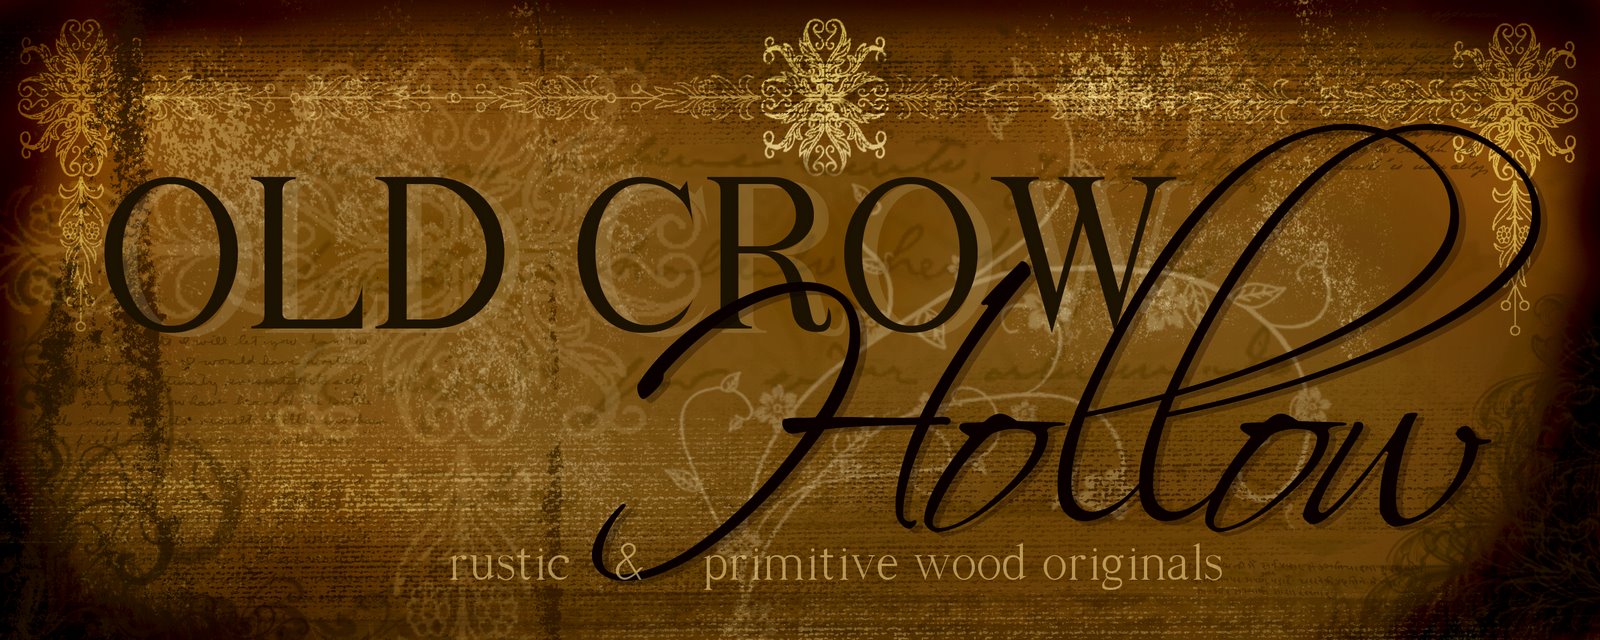 Old Crow Hollow